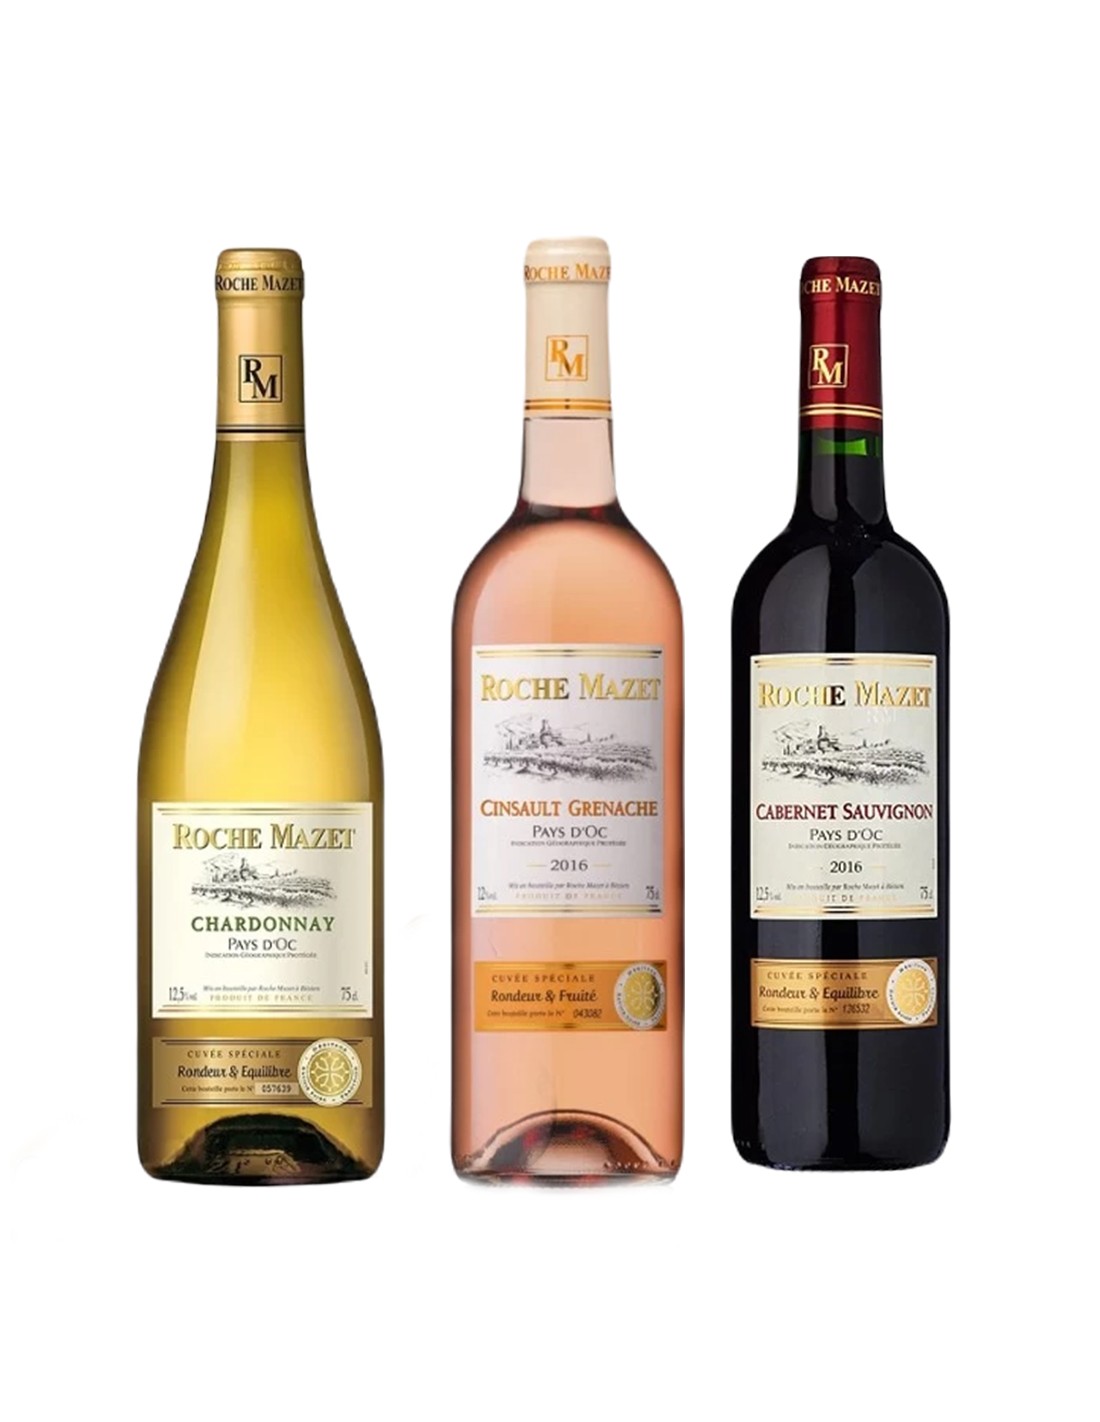 Pachet Roche Mazet French Wine Selection alcooldiscount.ro